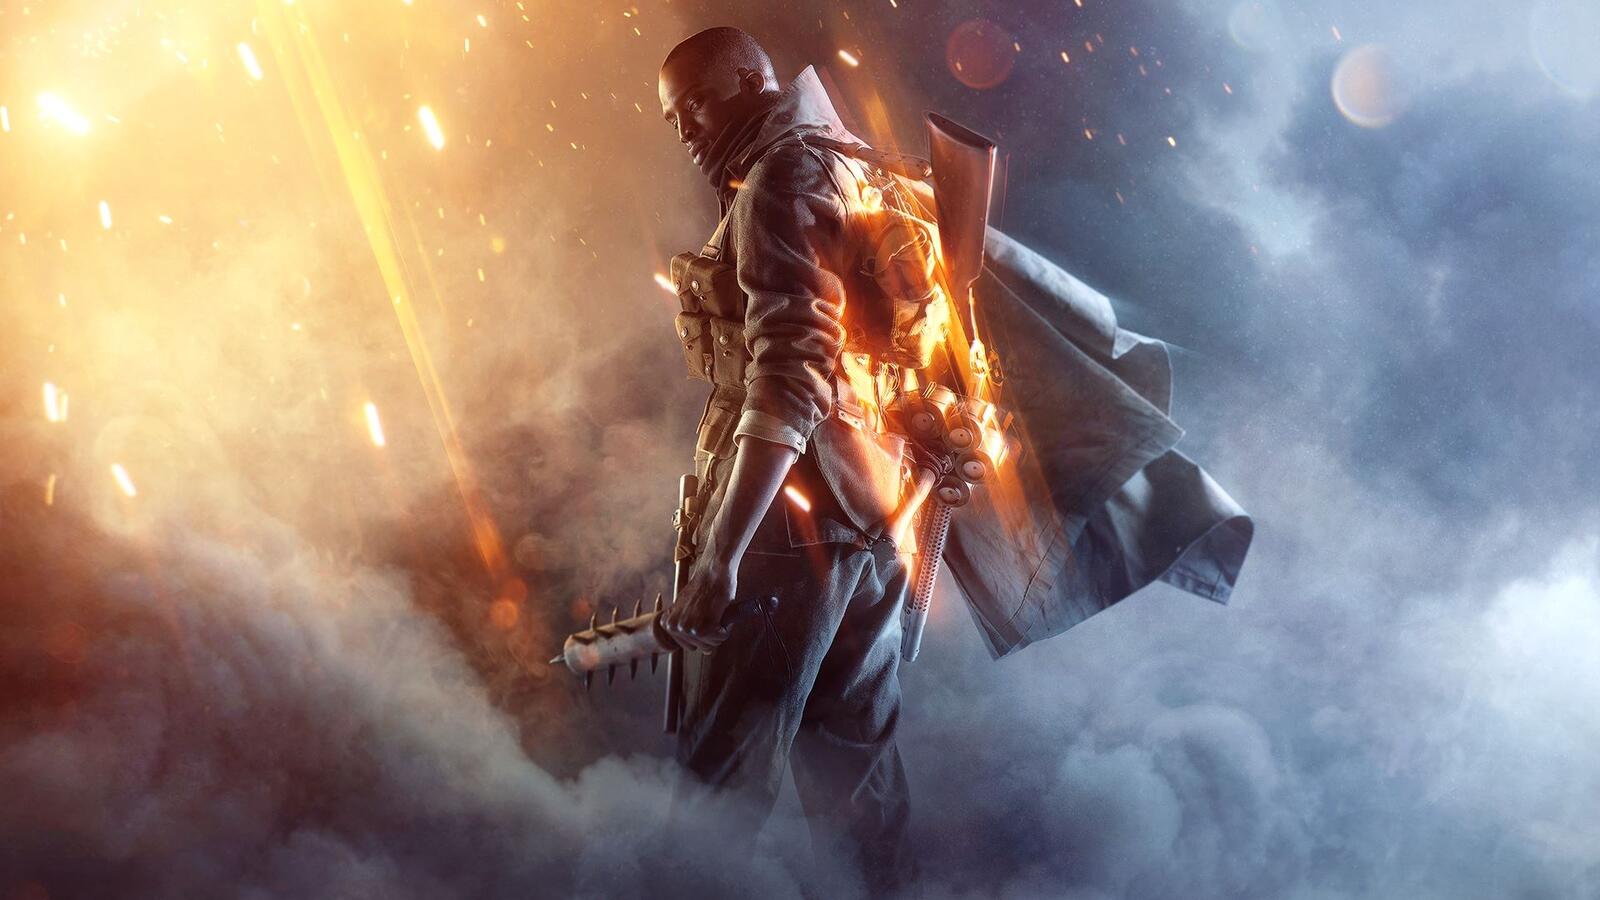 Free photo A picture from battlefield 1